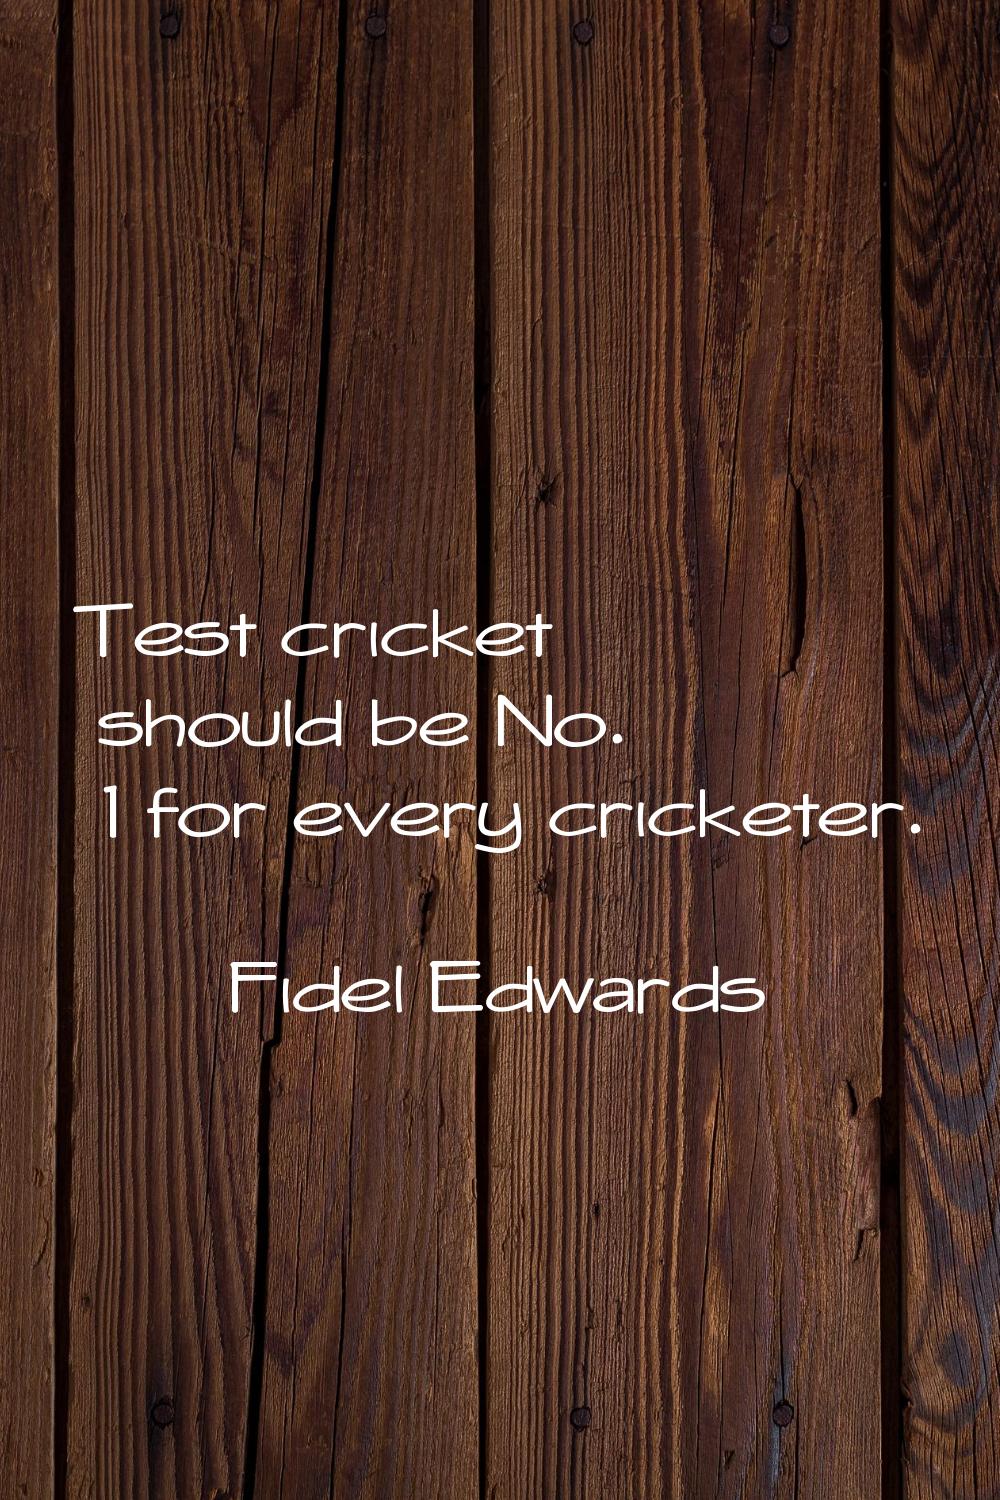 Test cricket should be No. 1 for every cricketer.